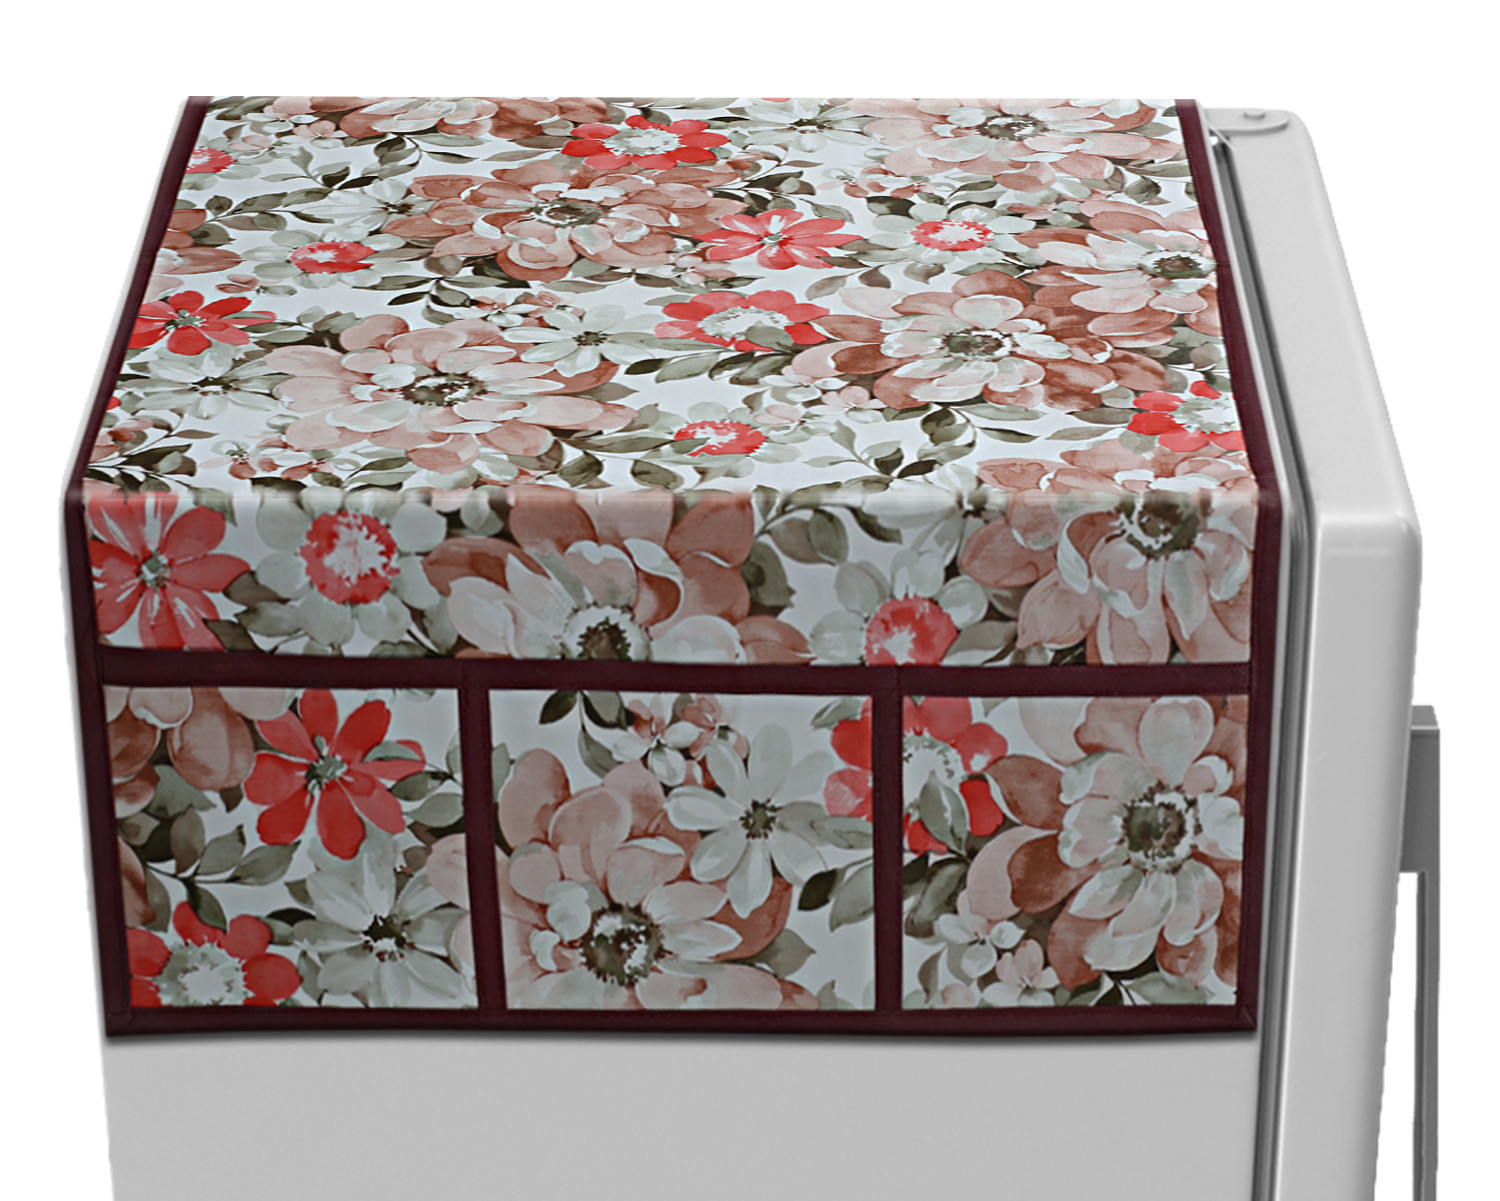 Kuber Industries Flower Printed PVC Fridge Top Cover, Protect For Scratches, Wear & Tear And Dust With 6 Utility Side Pockets (Pink)